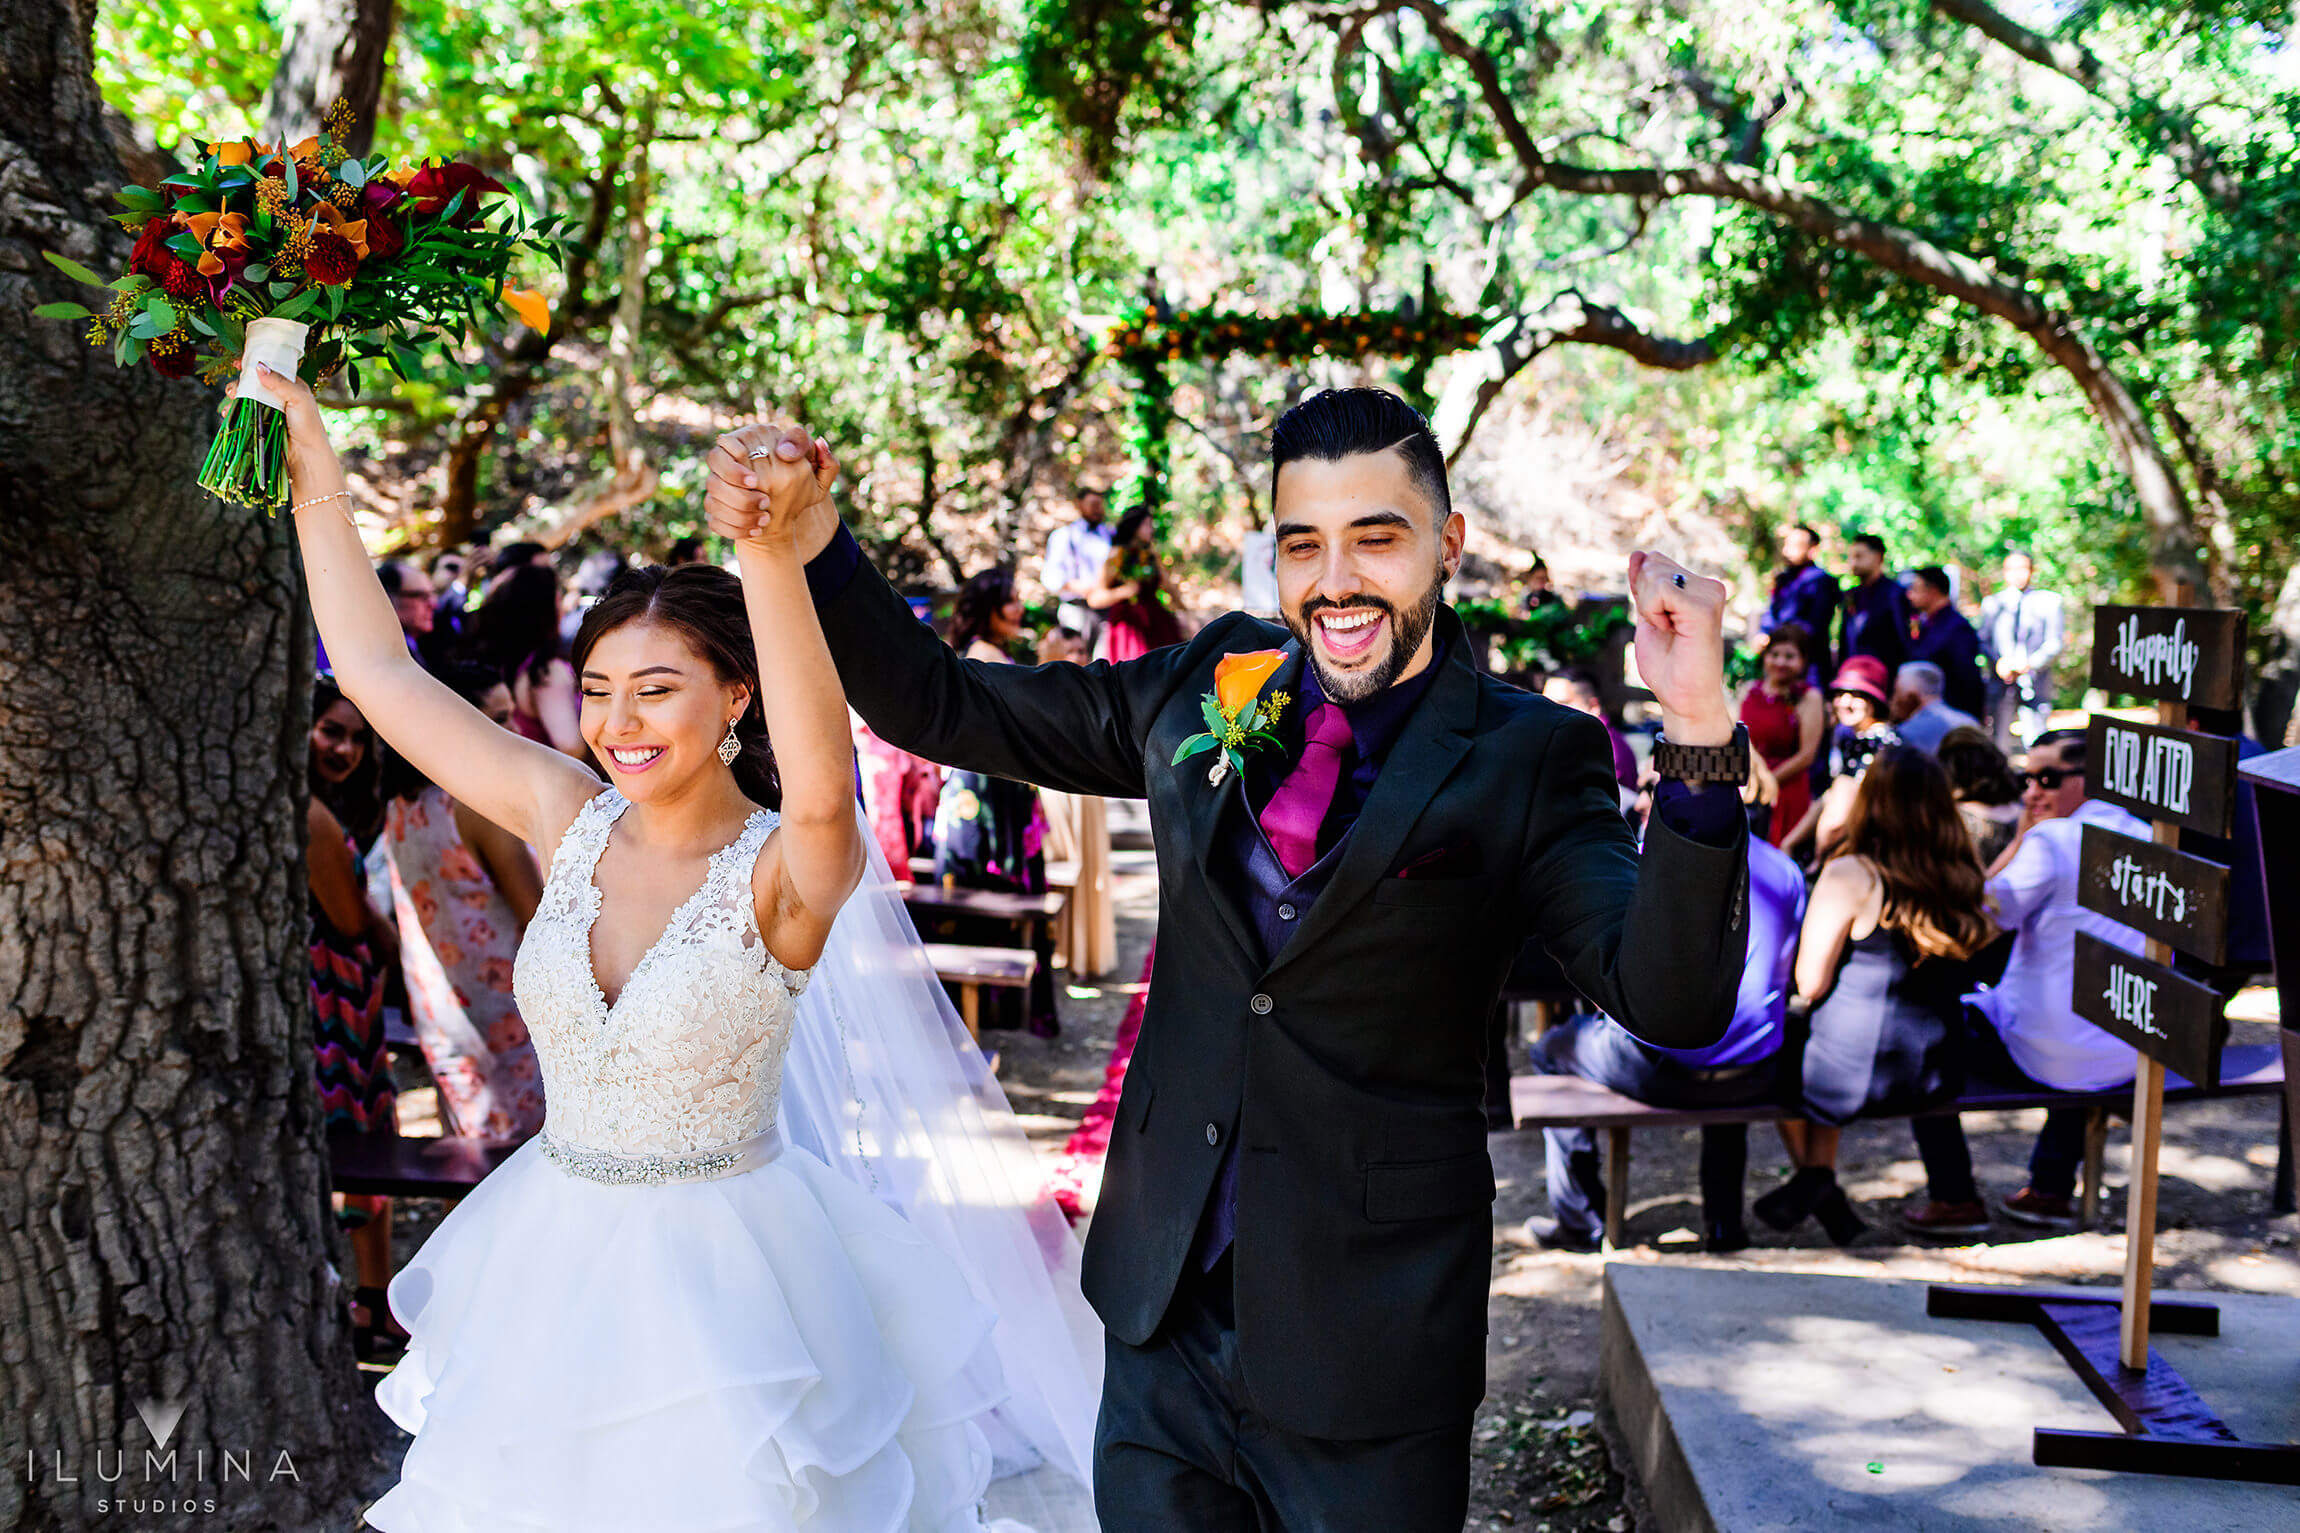 Bride and groom hold hands and celebrate after finishing marriage ceremony at Anaheim Oak Canyon Nature Center wedding